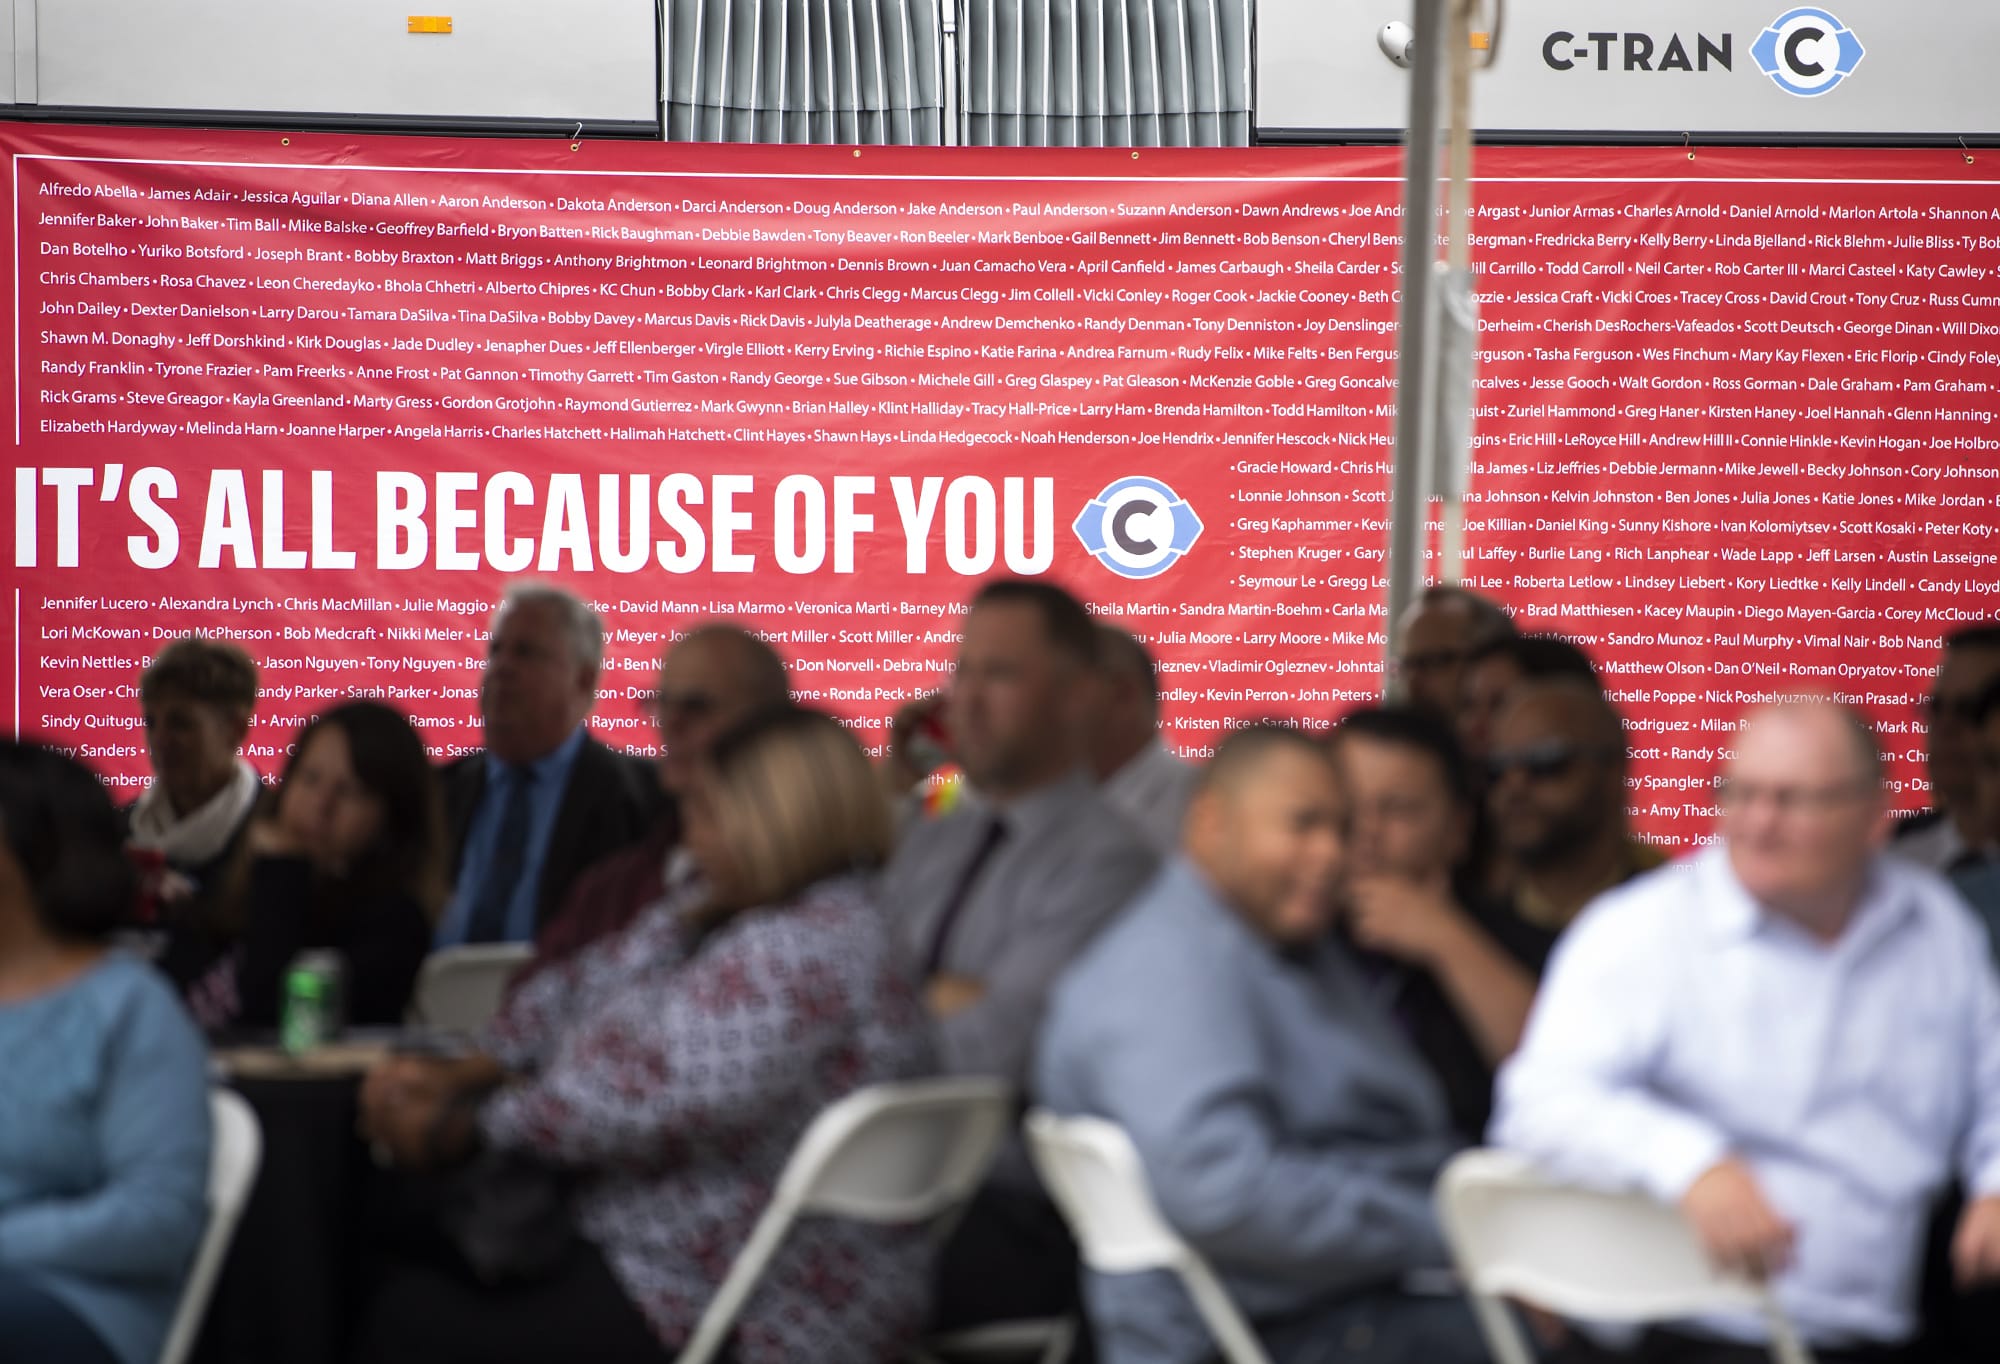 C-Tran hangs a banner with every C-Tran employeeÕs name on it, totaling 463, for the special event at the C-Tran offices in Vancouver on July 9, 2019. C-Tran revealed that The American Public Transportation Association has selected the company as its Transit System of the Year for 2019.